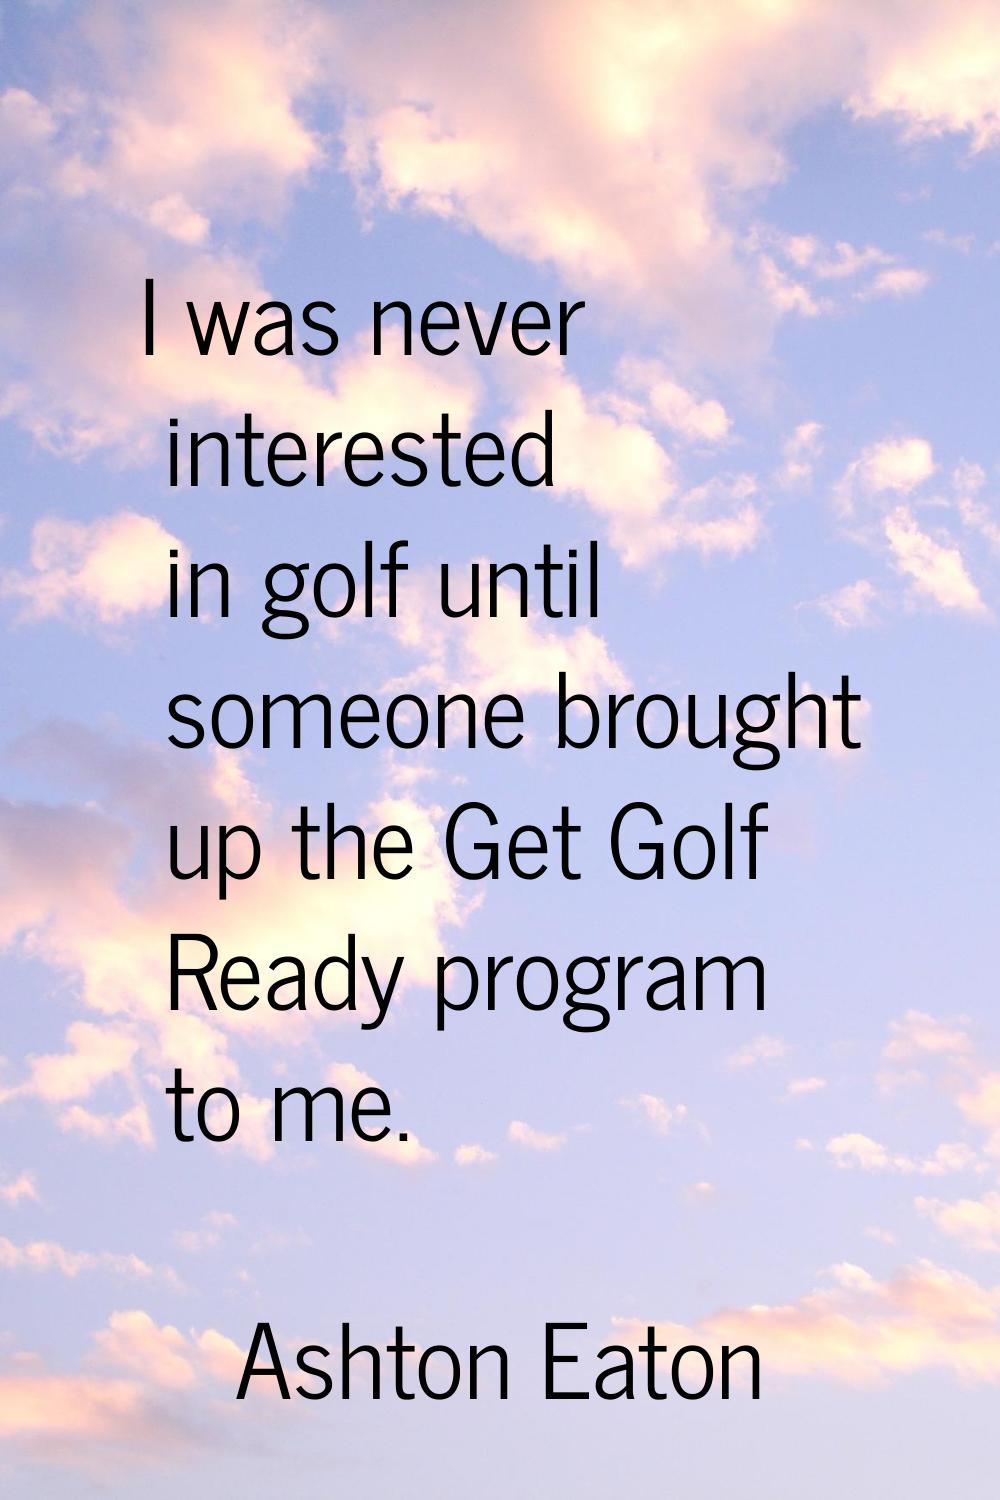 I was never interested in golf until someone brought up the Get Golf Ready program to me.